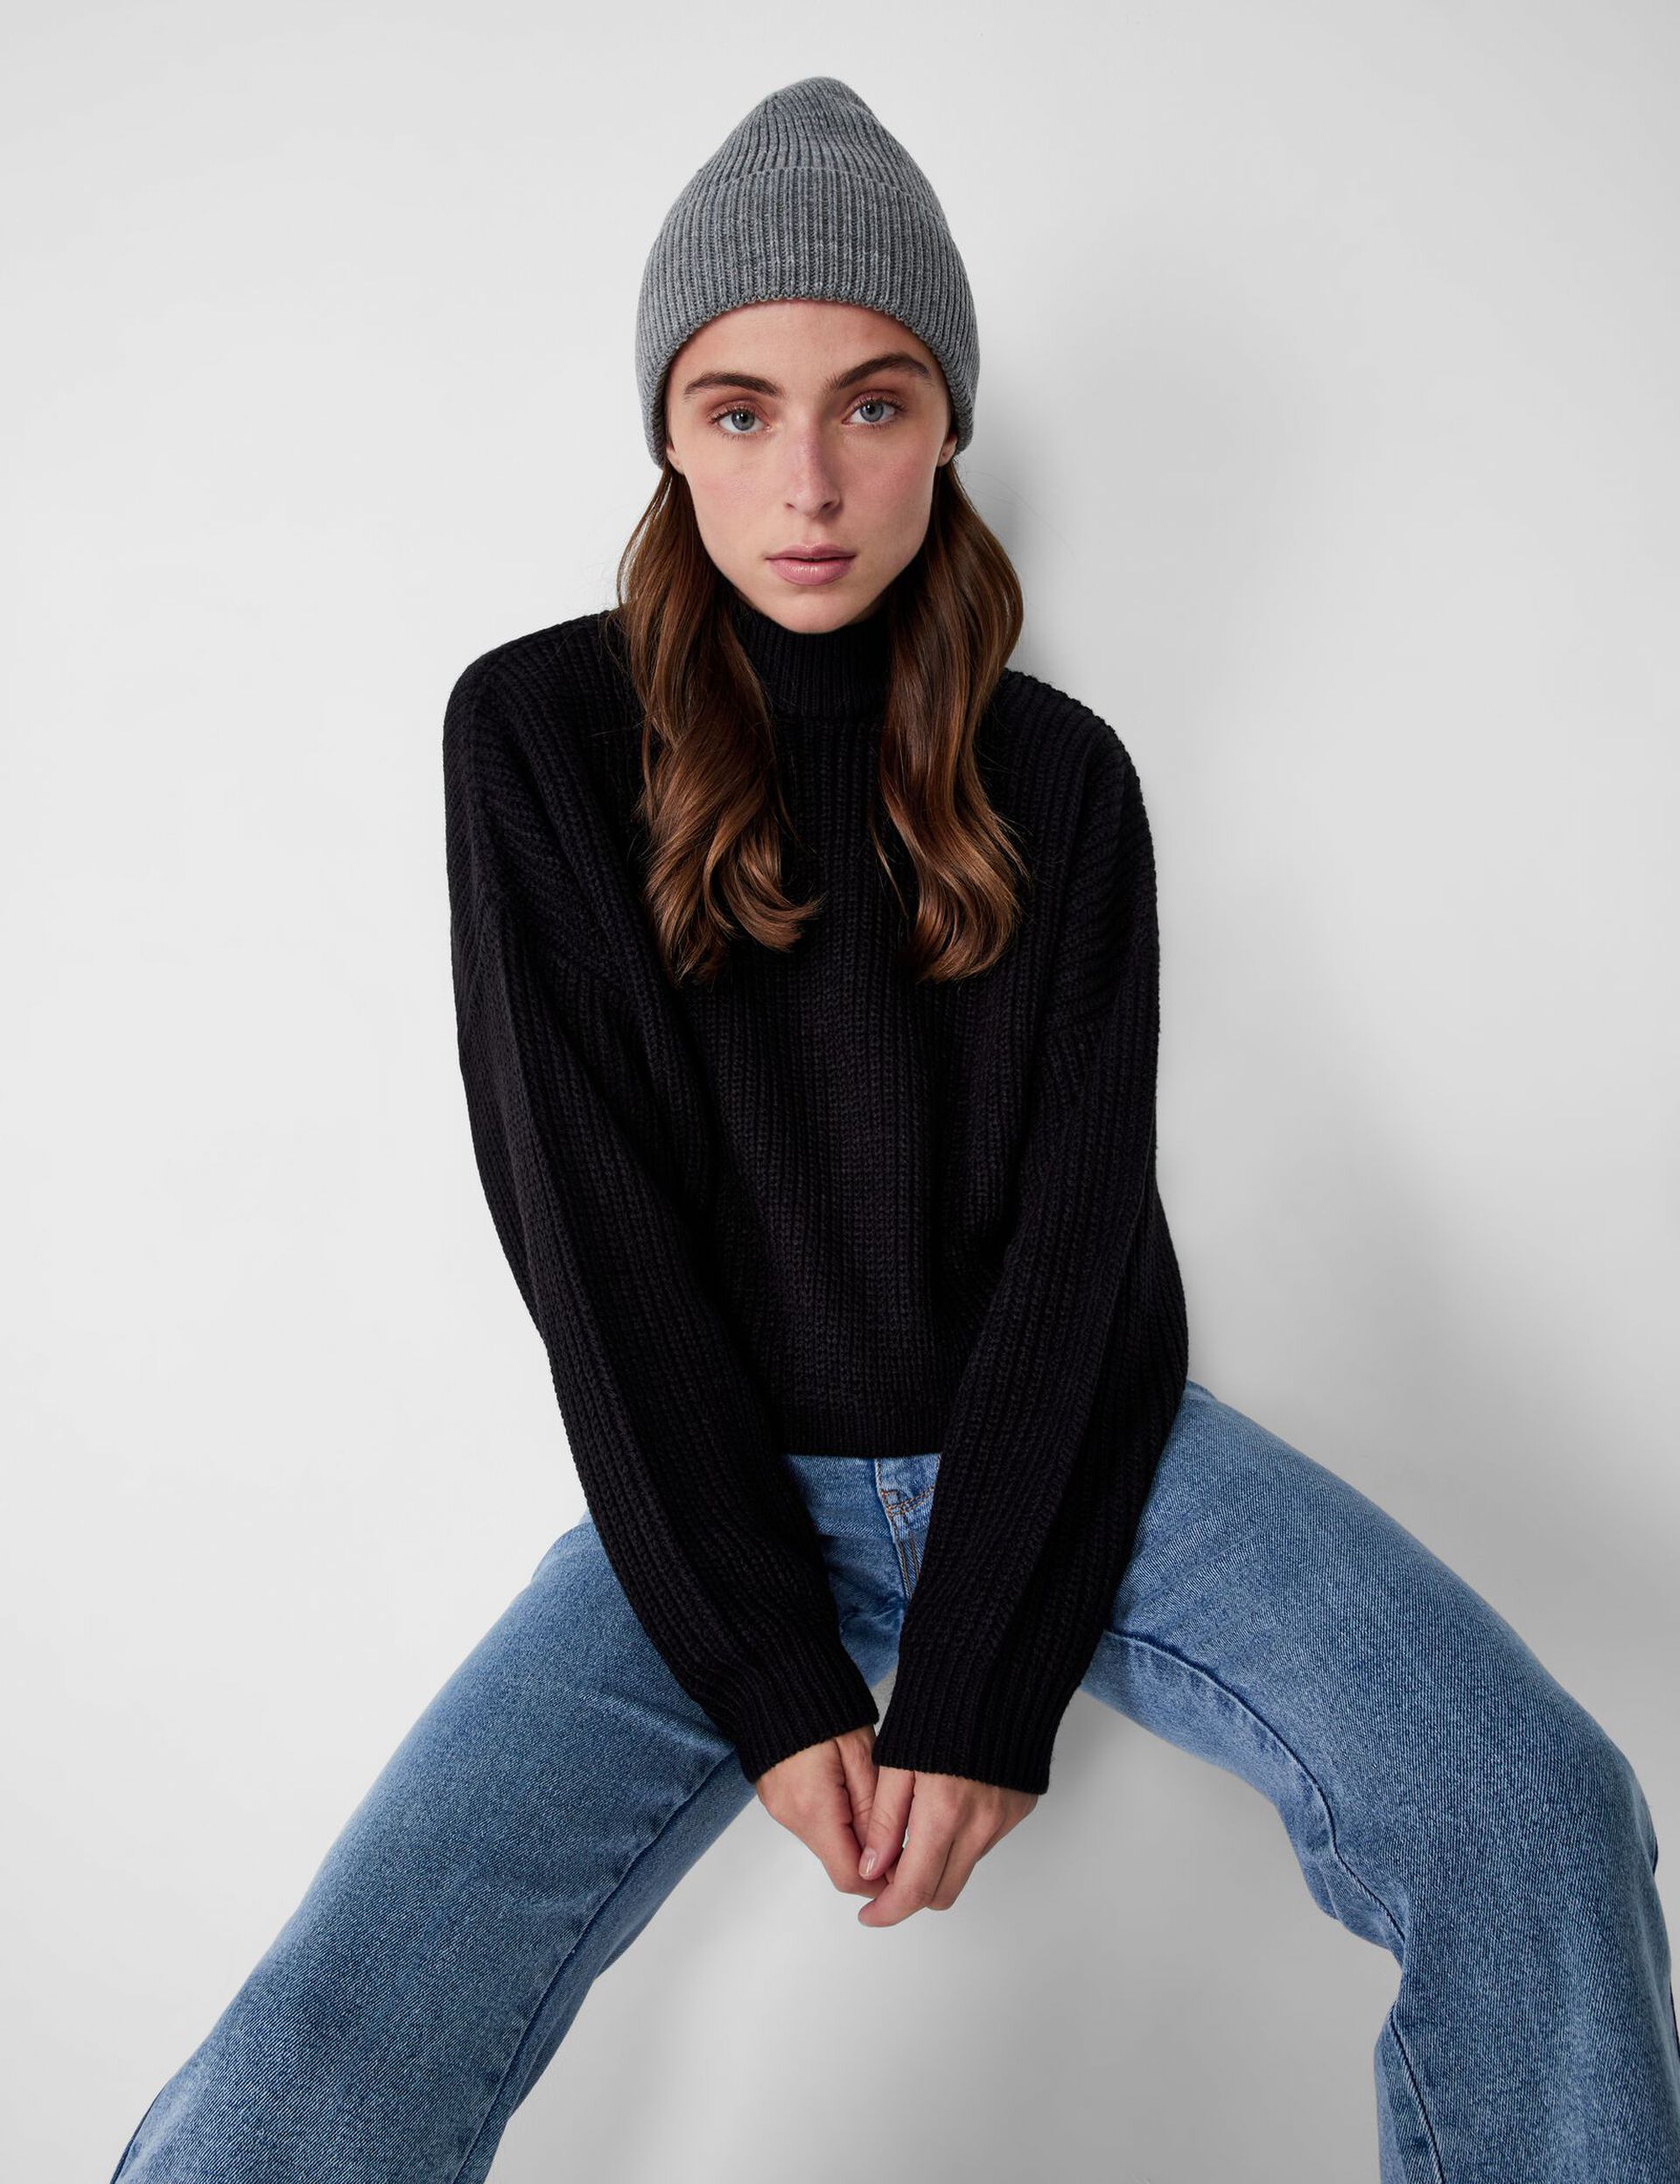 Ribbed beanie with turn-up